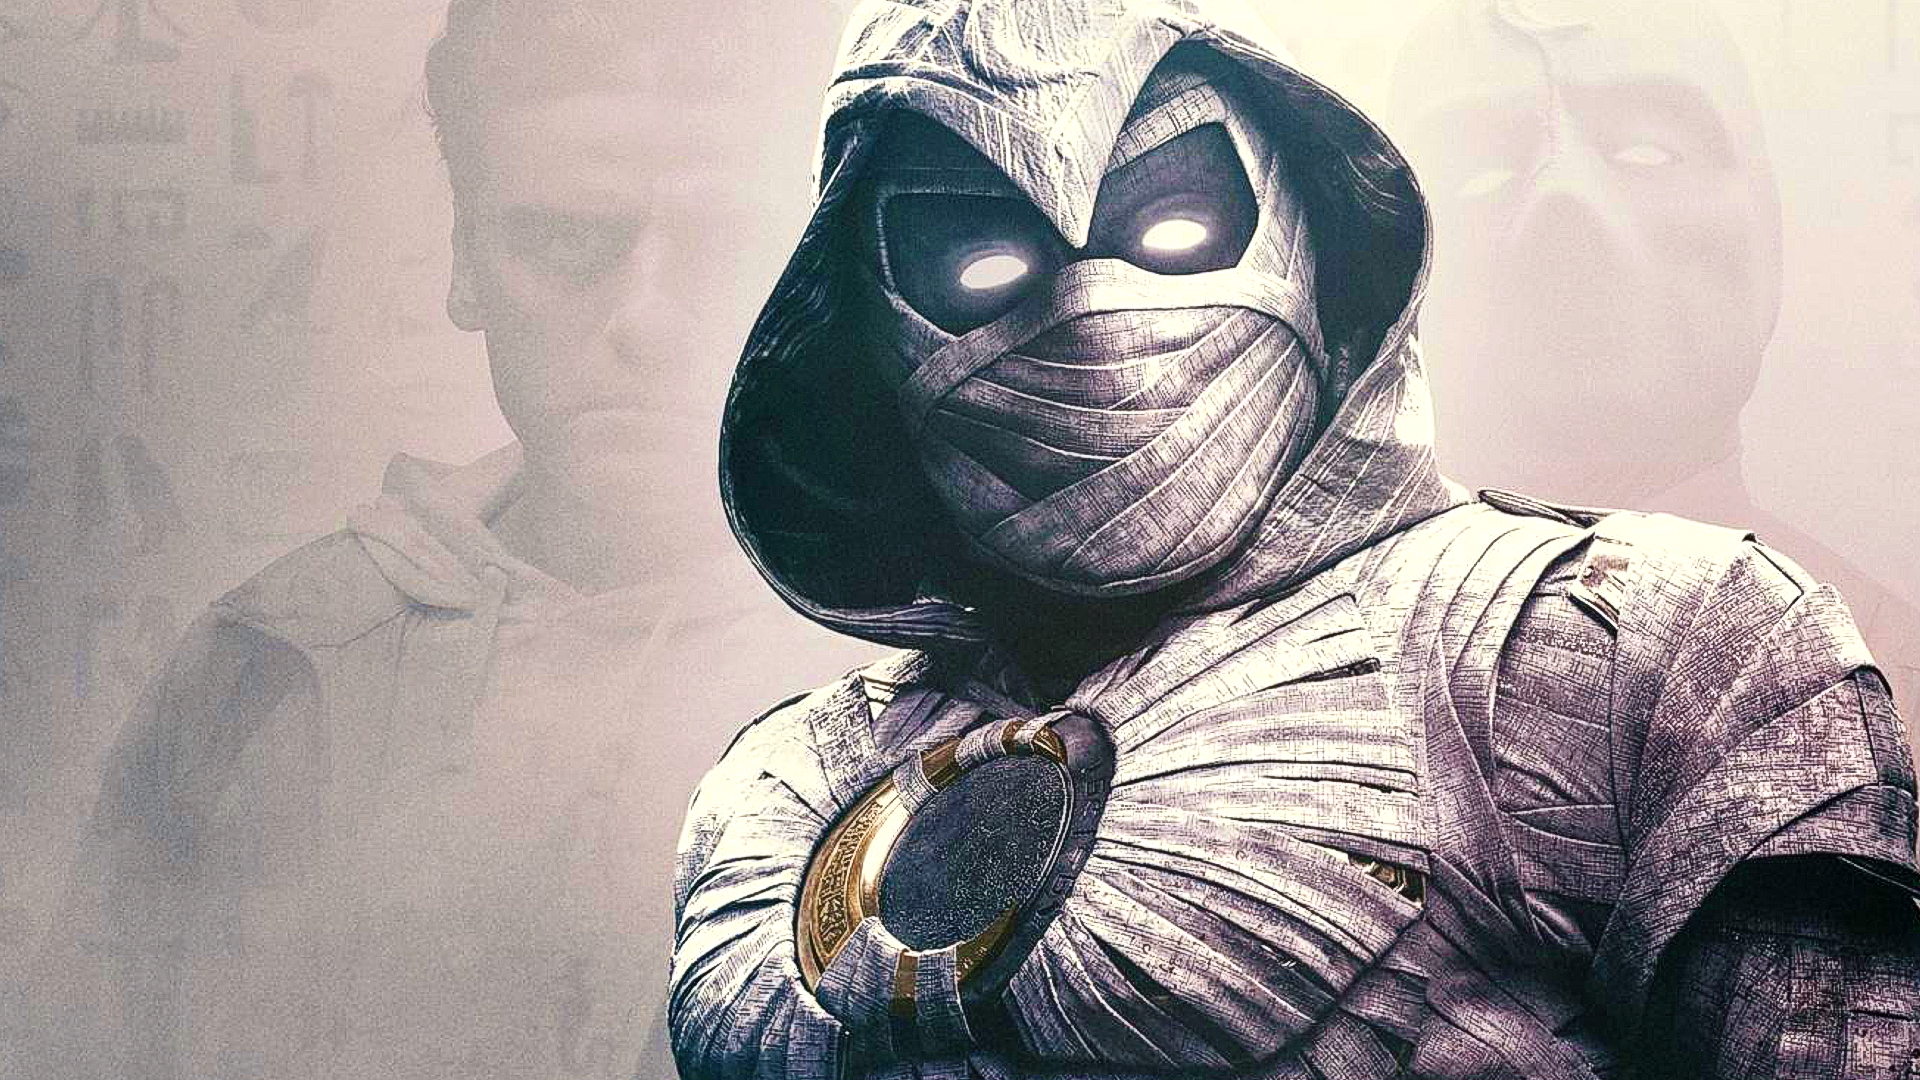 Sketch tutorial | how to draw moon knight easy step-by-step - YouTube